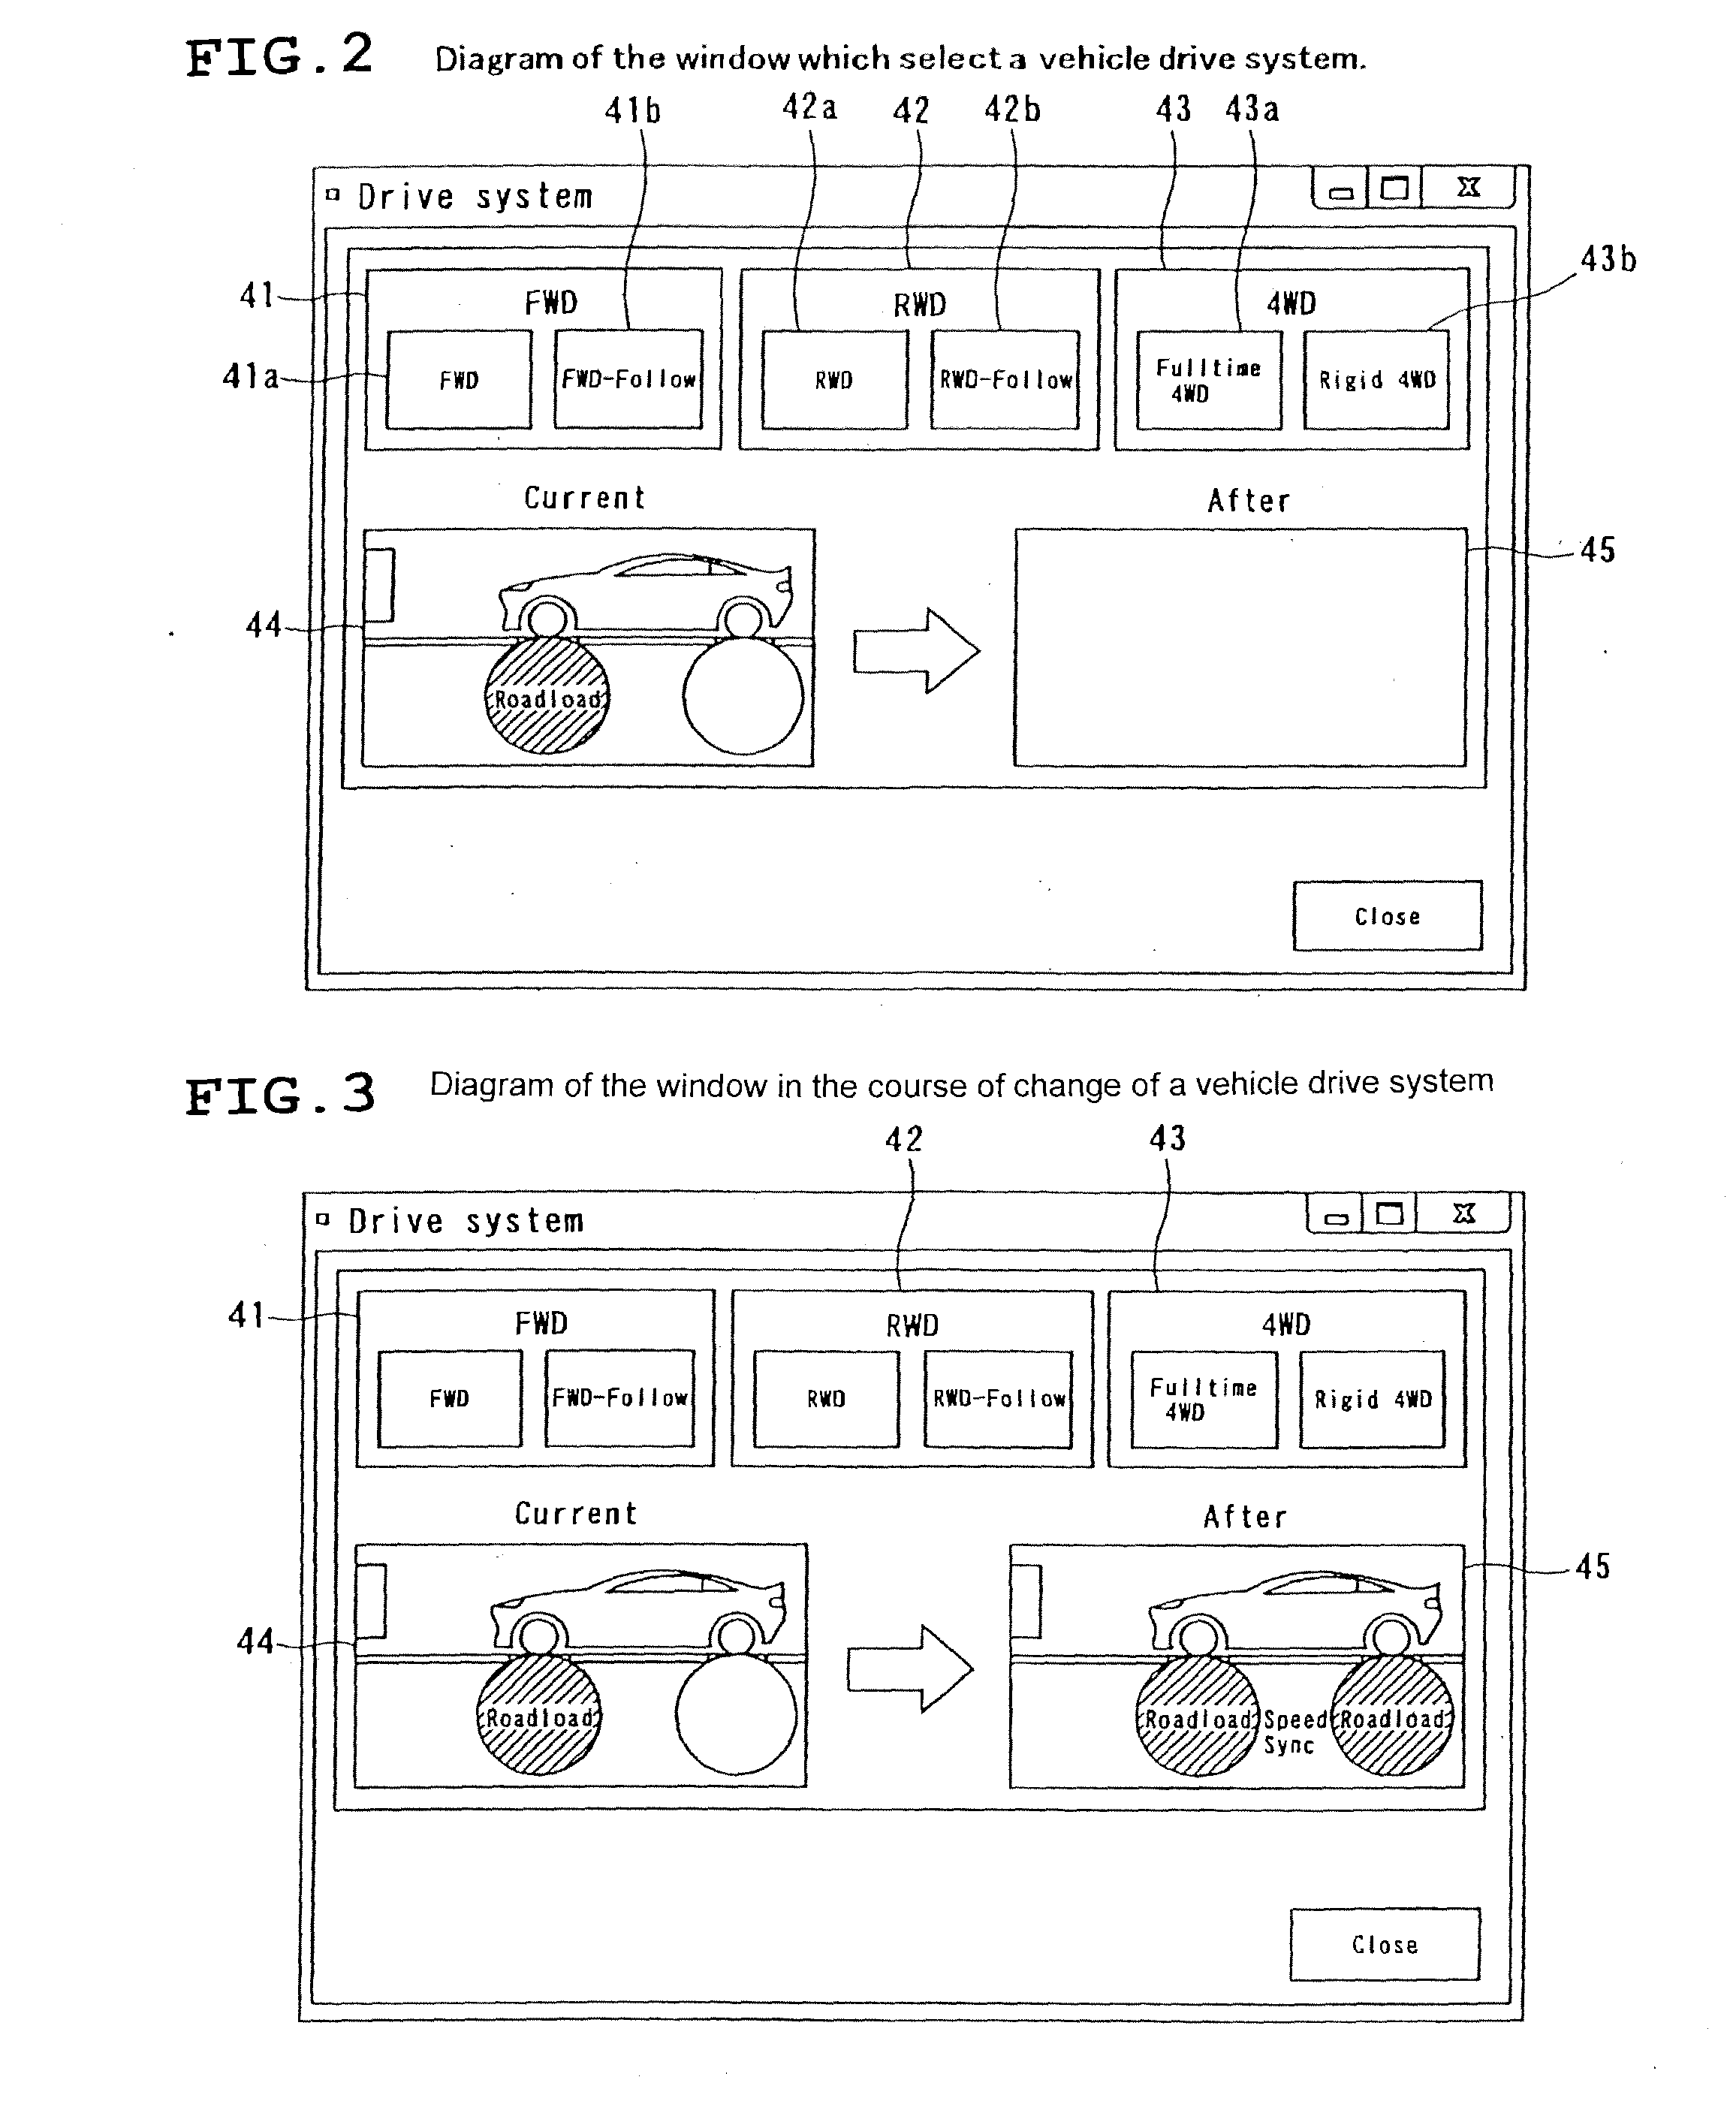 Operation display device of chassis dynamometer system